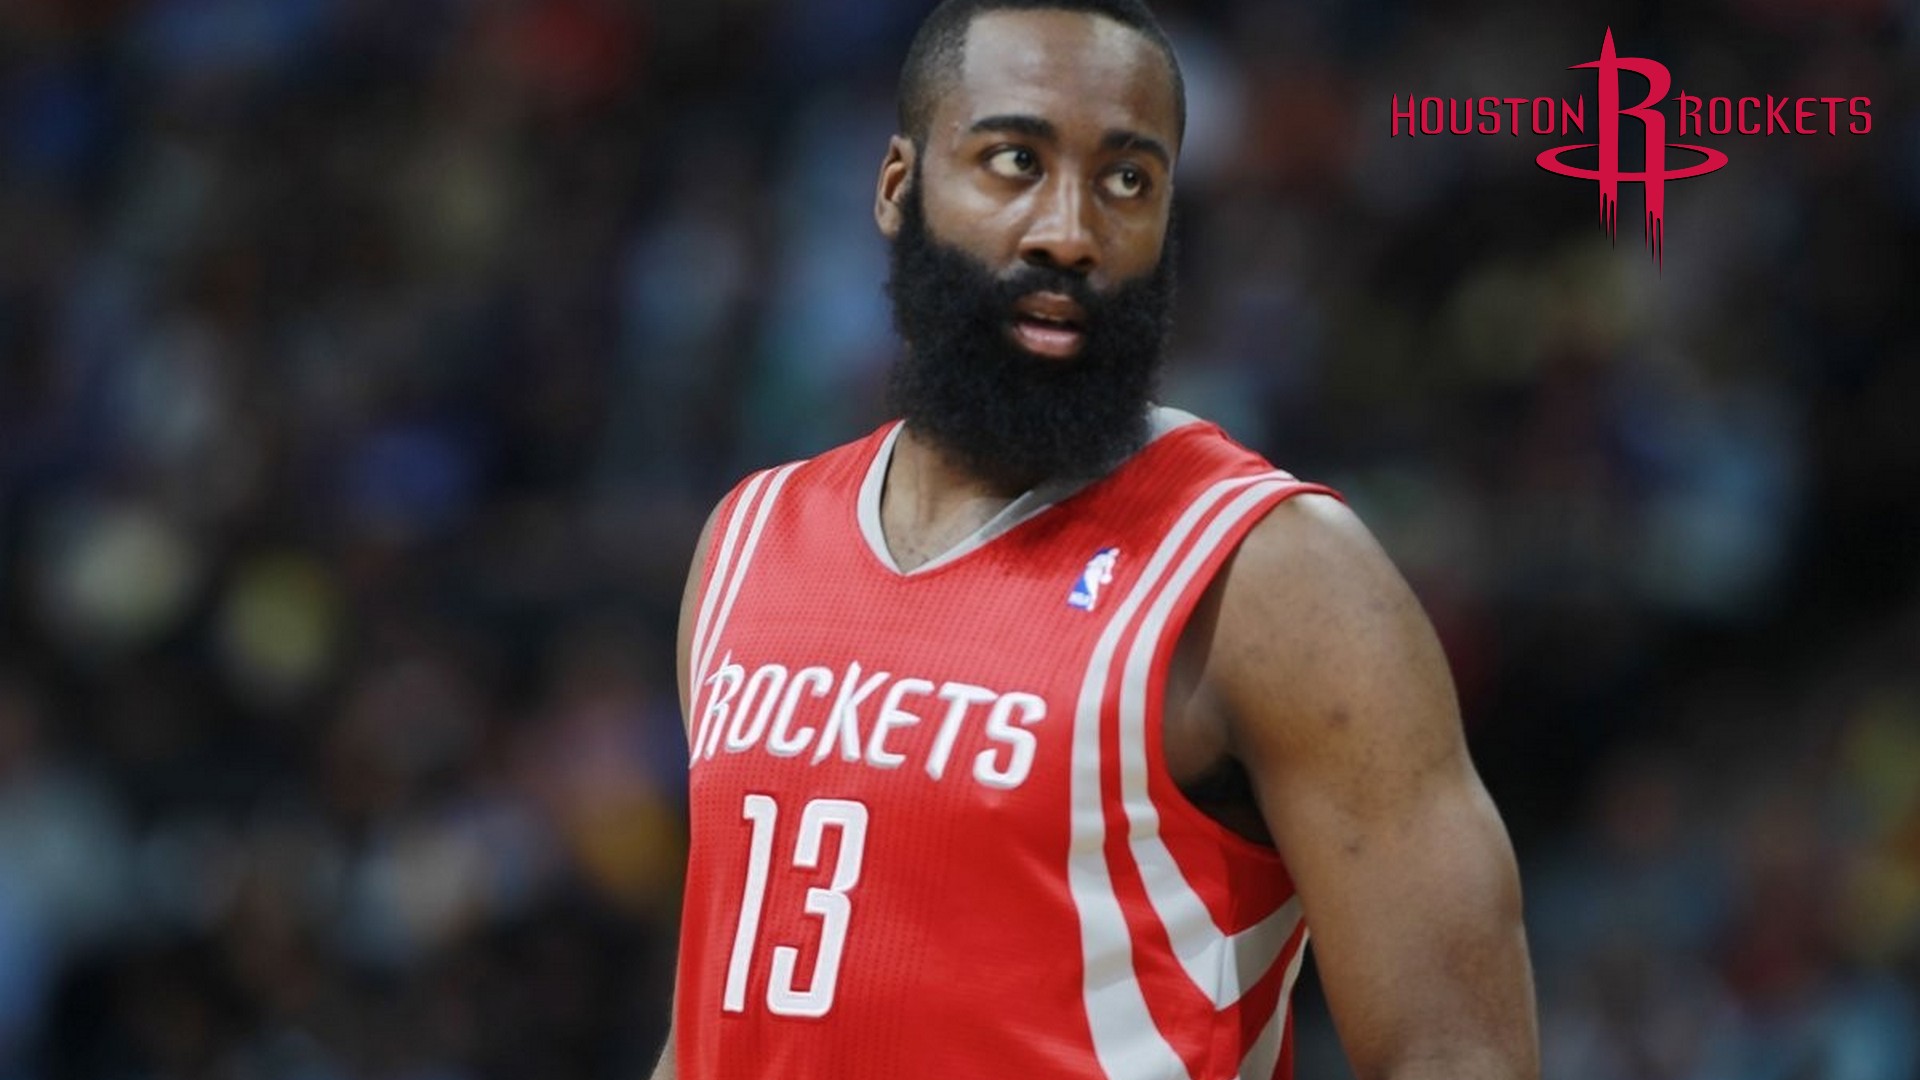 Wallpapers James Harden with image dimensions 1920x1080 pixel. You can make this wallpaper for your Desktop Computer Backgrounds, Windows or Mac Screensavers, iPhone Lock screen, Tablet or Android and another Mobile Phone device